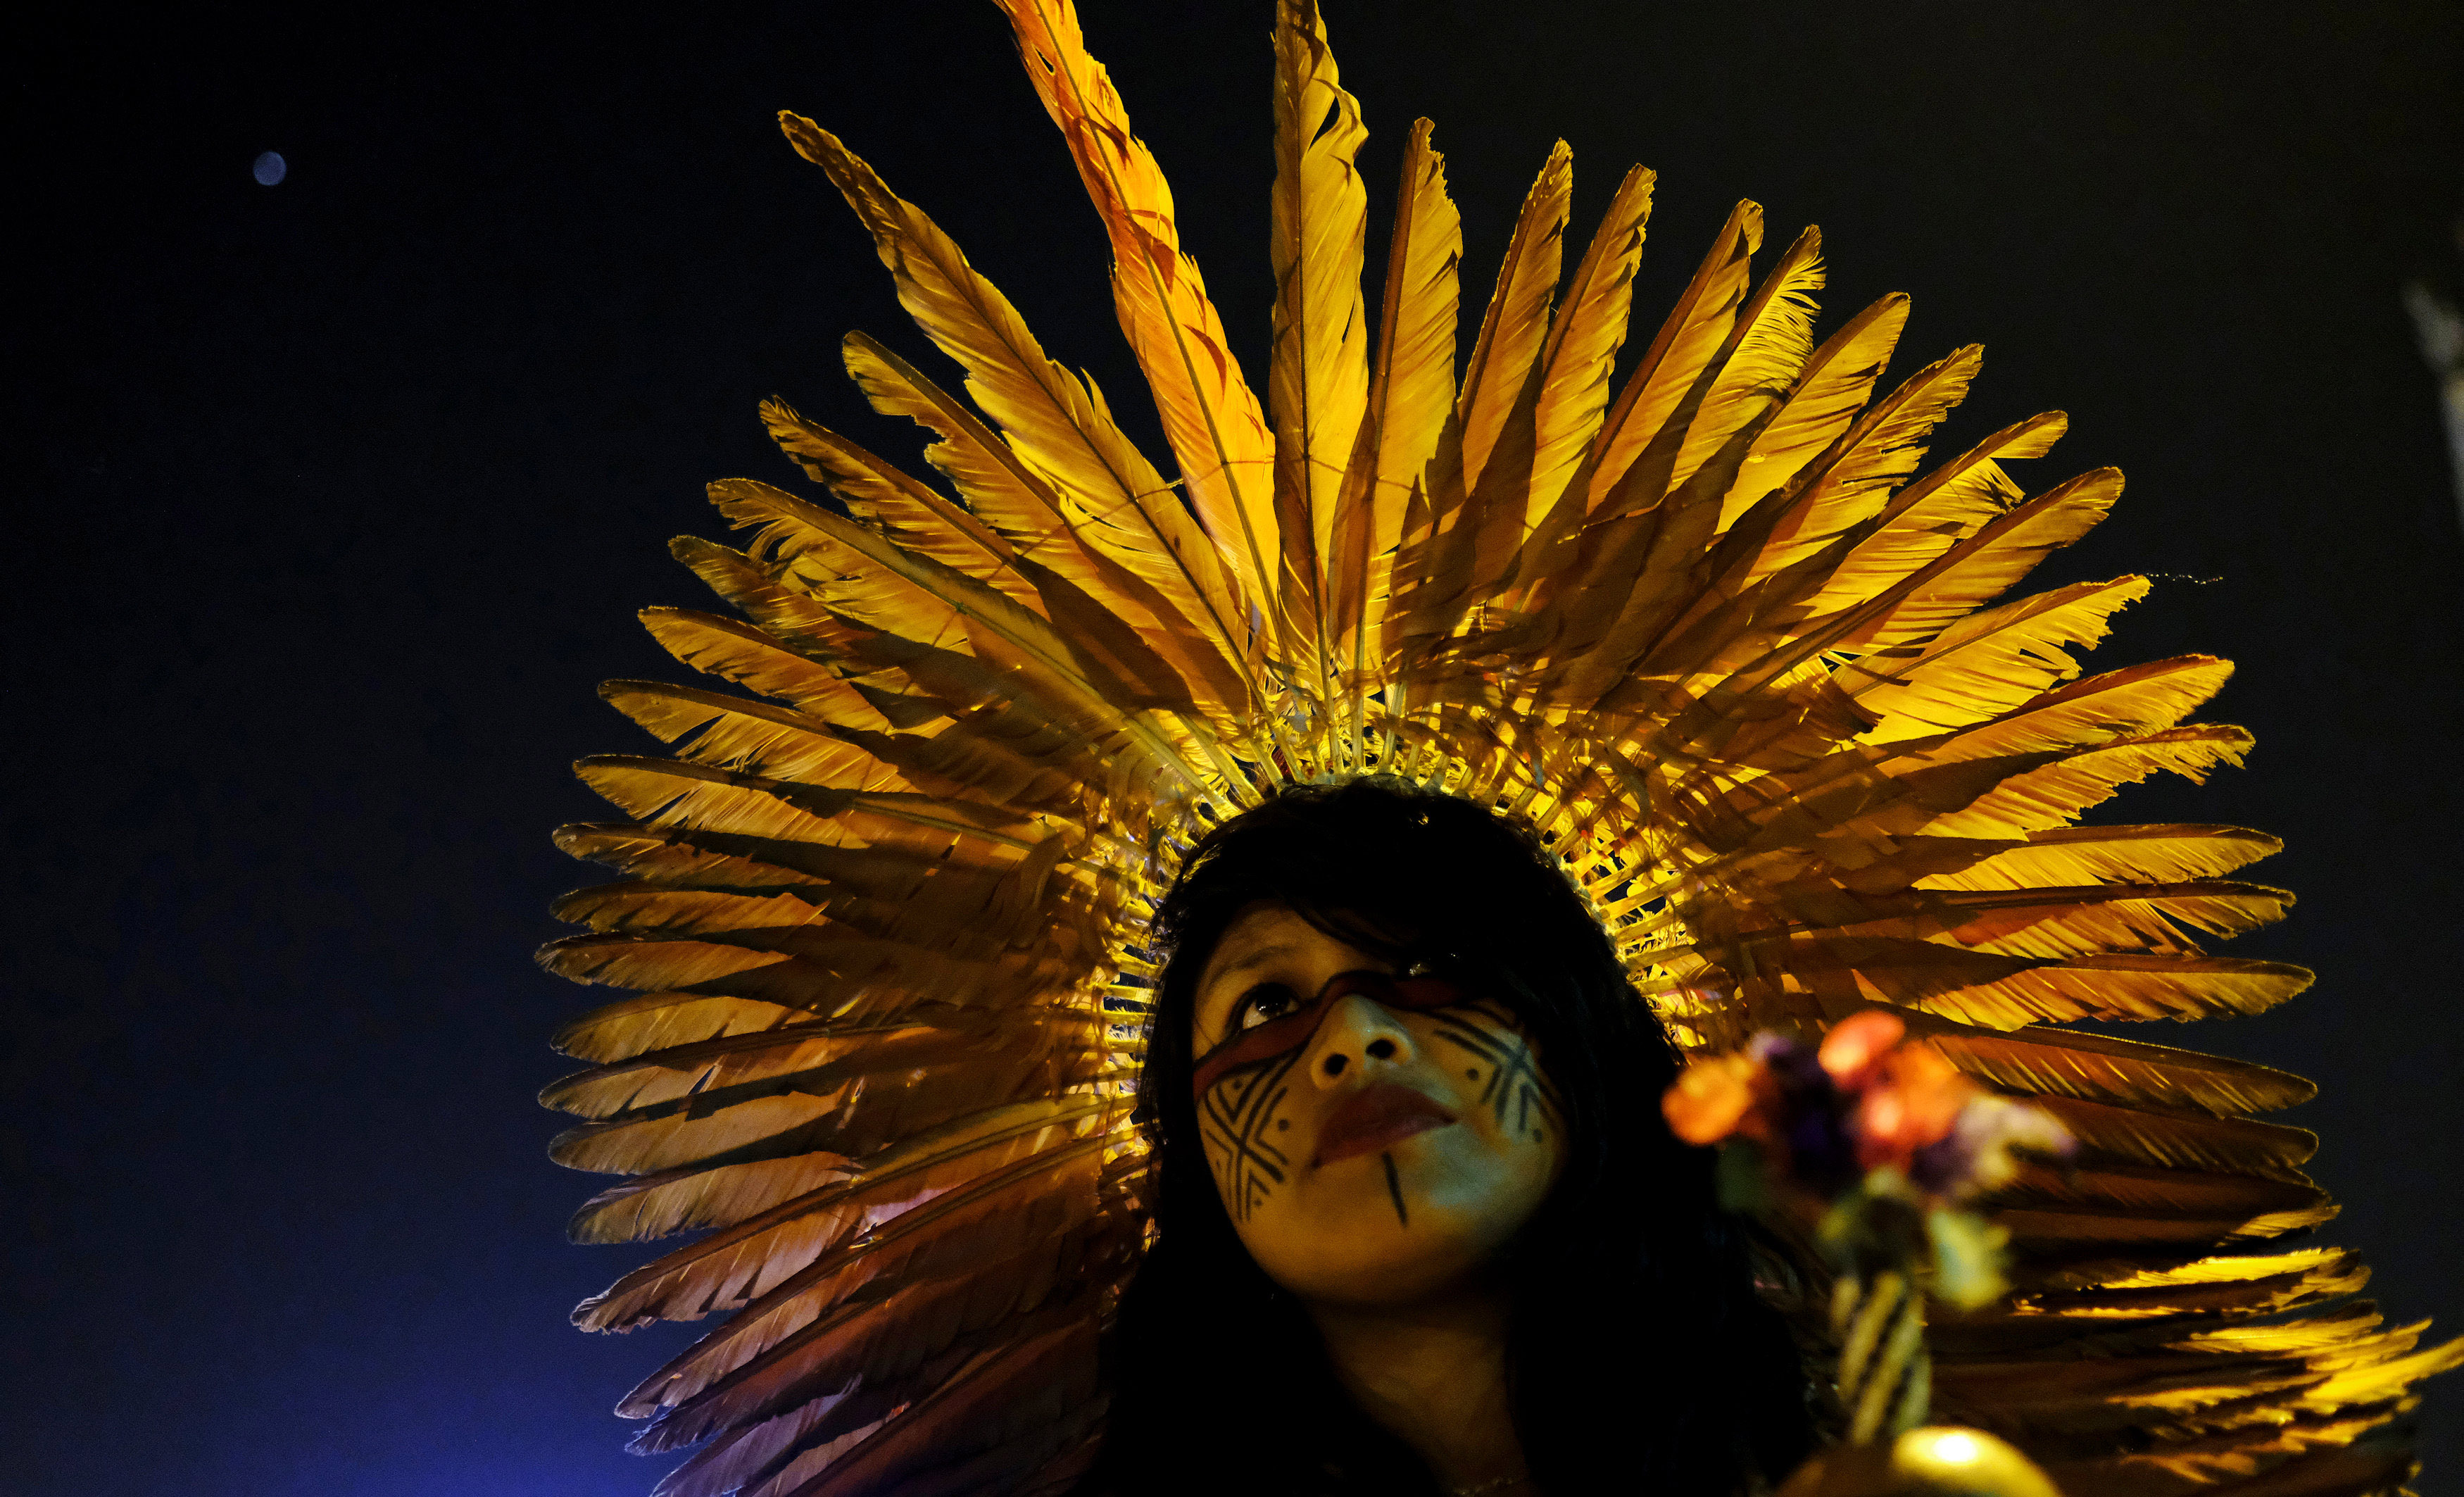 A Guarani Indian woman takes part in a protest by black and indigenous women against racism and machismo in Sao Paulo, Brazil, July 25, 2017.